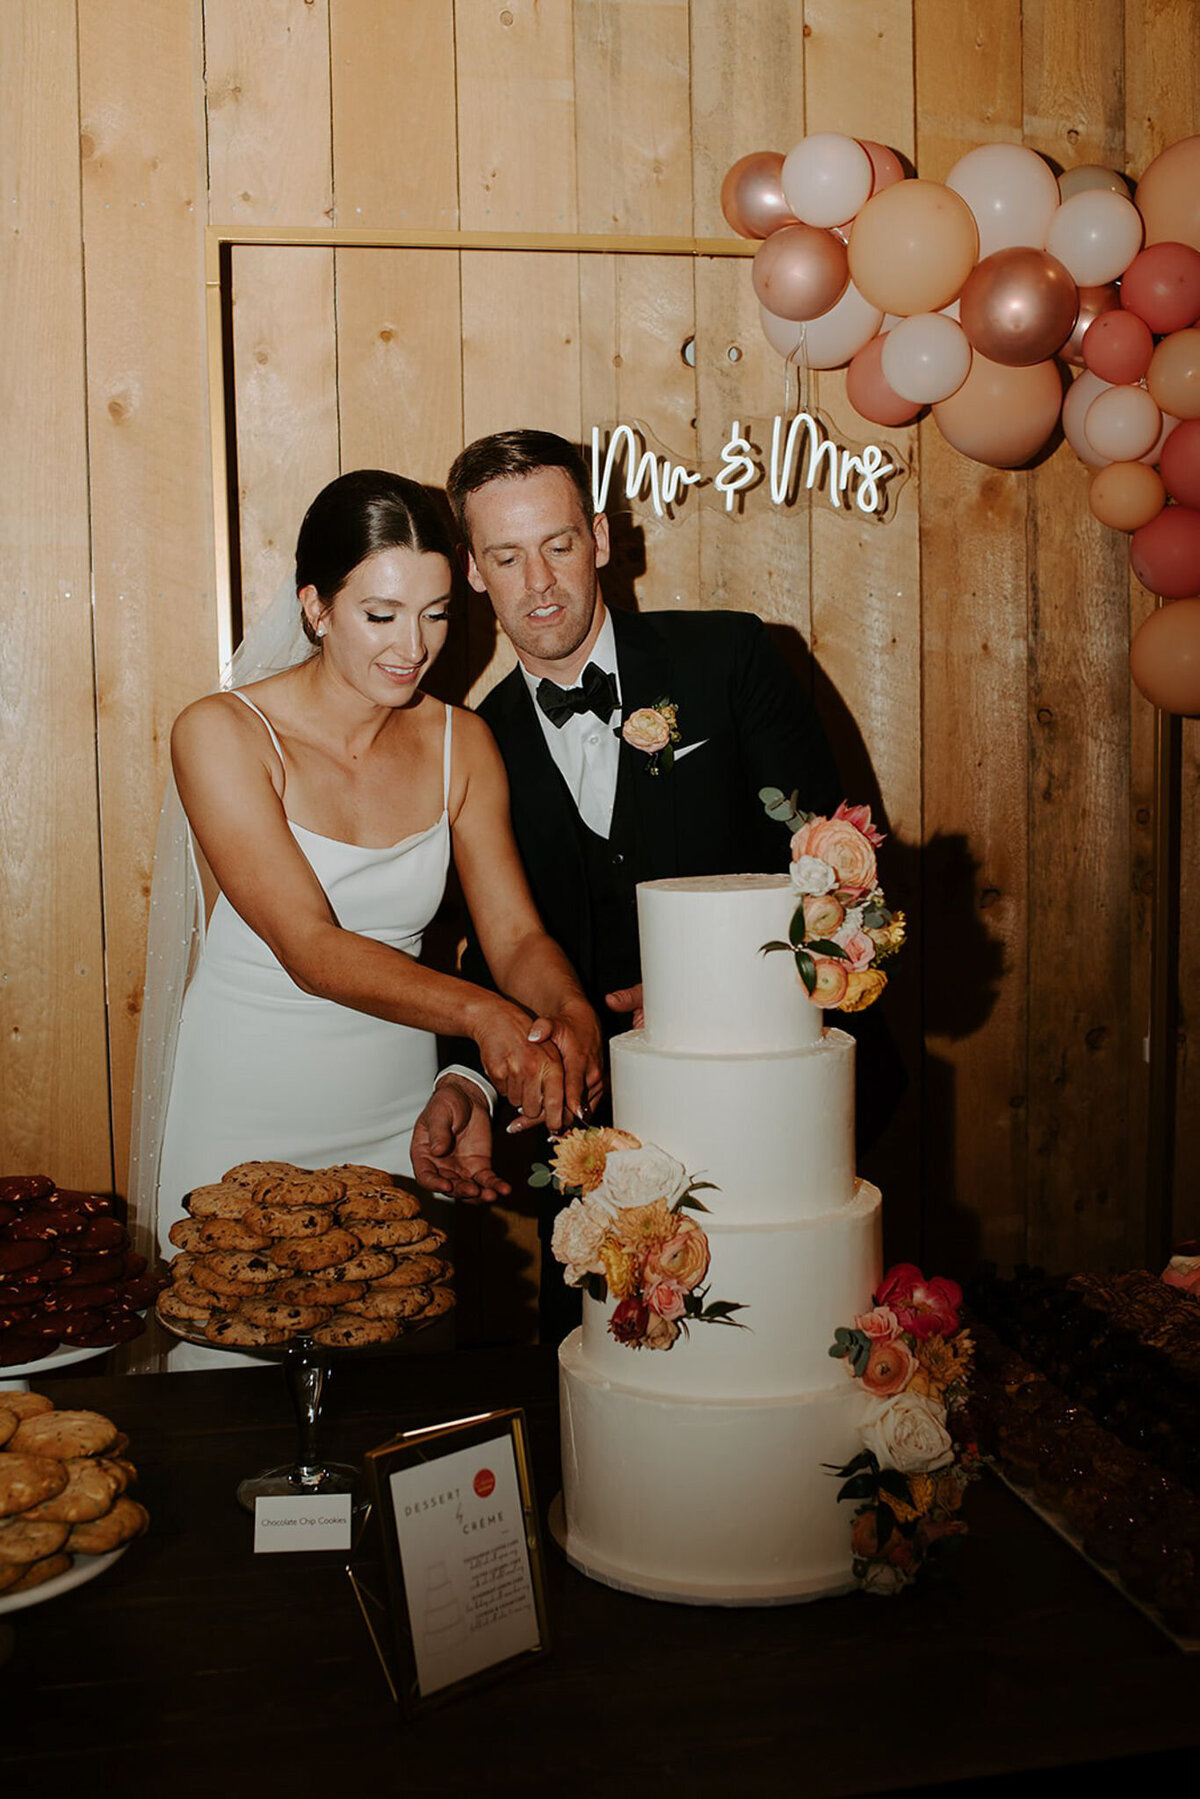 Innovative cream puffs and desserts, created by Crème Cream Puffs, playful and modern treats in Calgary, Alberta, featured on the Brontë Bride Vendor Guide.